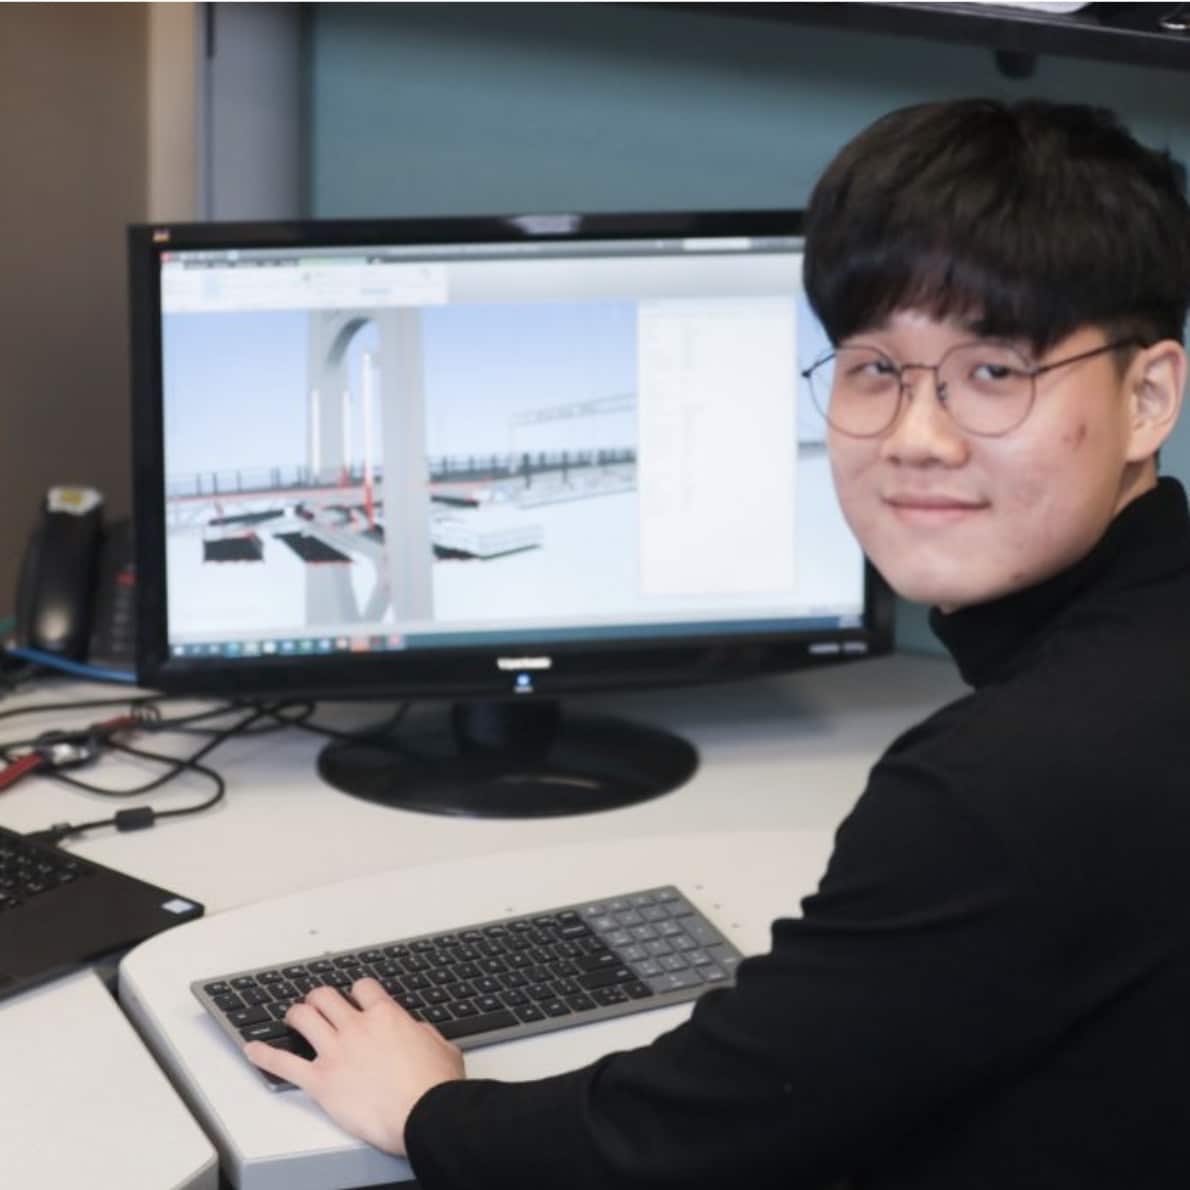 Halifax Harbour Bridges engineering student Dong Woo Seo sits in front of a screen showing a digital rendering of the Macdonald Bridge.